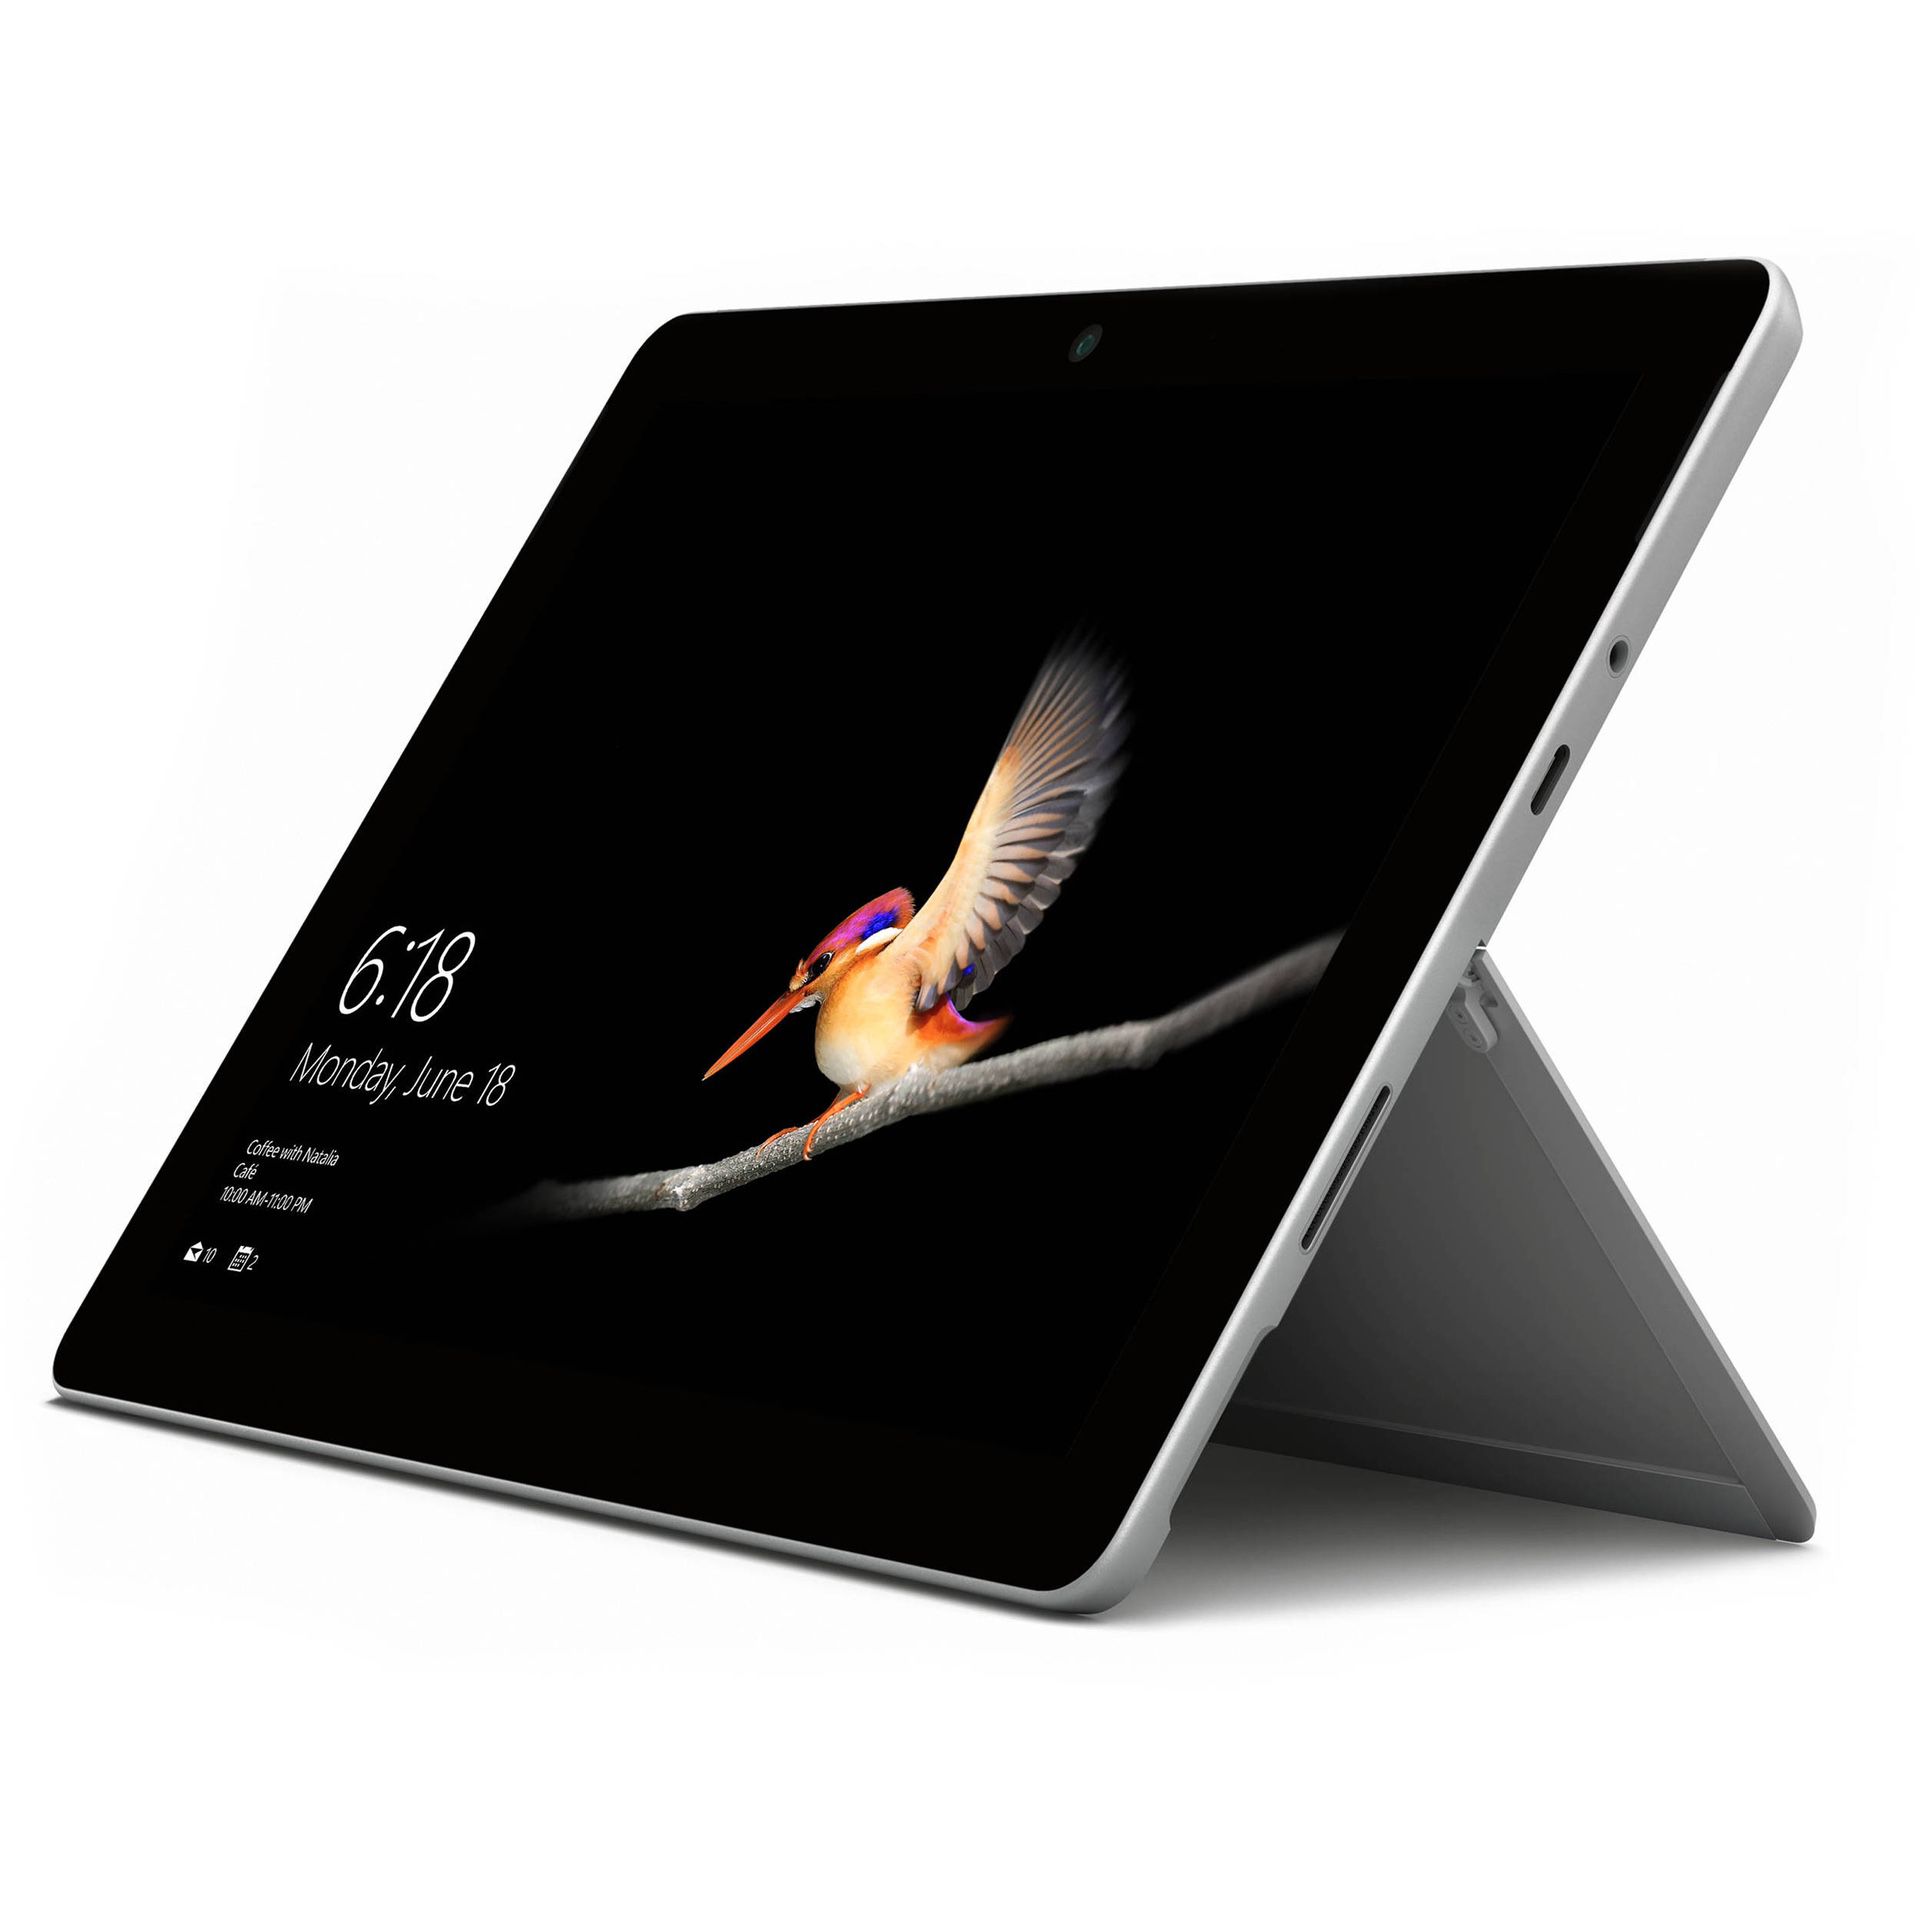 Microsoft surface go 64gb /128gb new tablet only